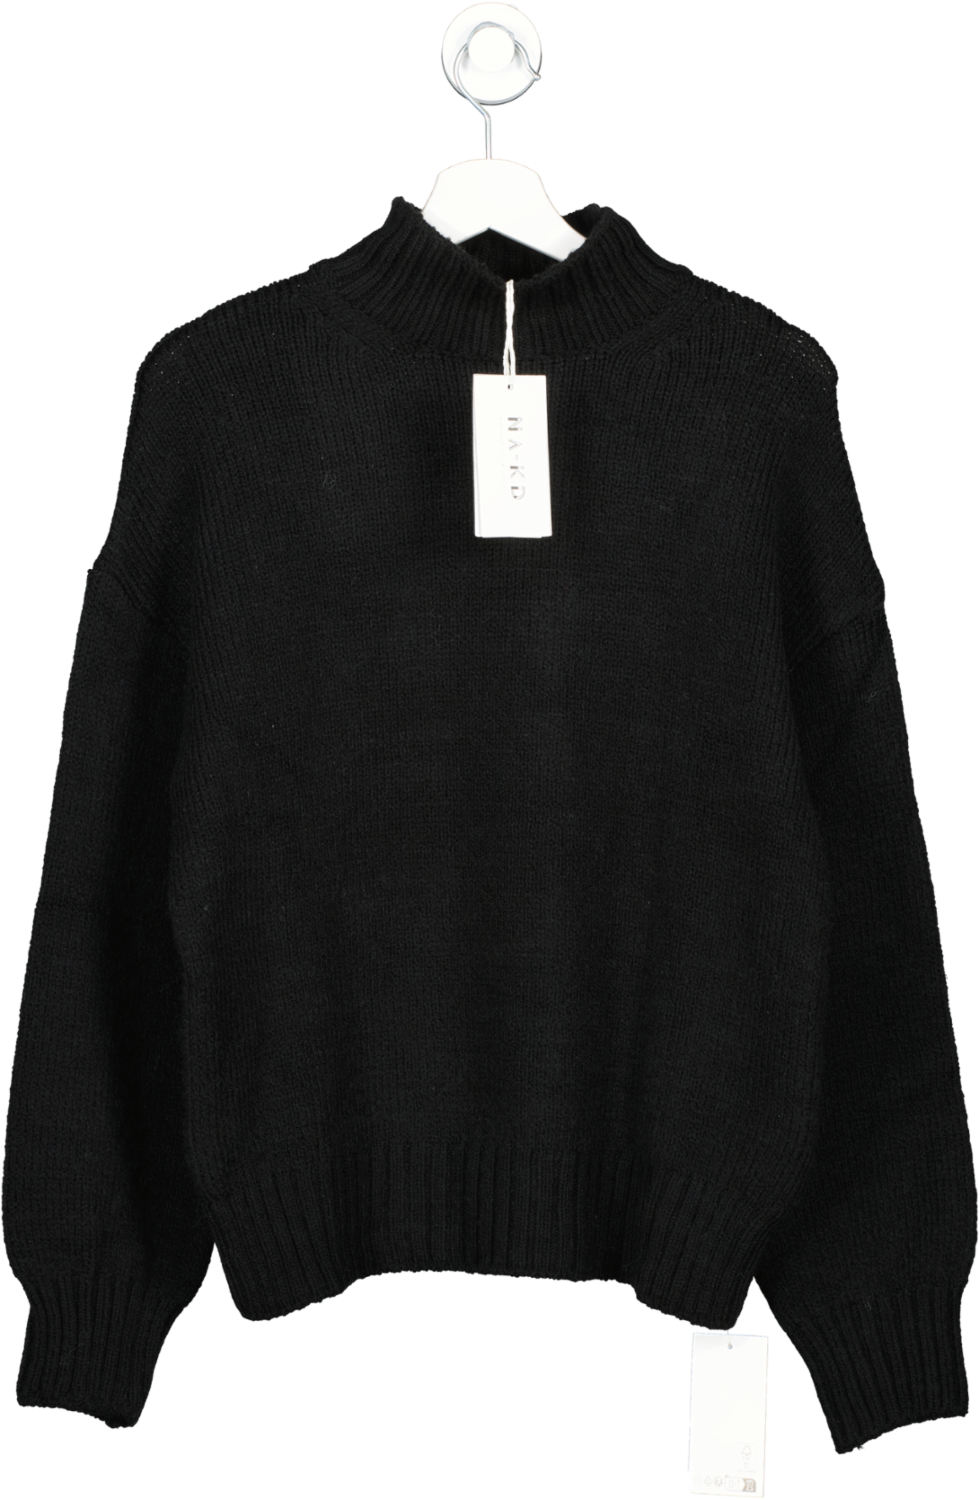 NA-KD Black Turtle Neck Knitted Sweater UK S